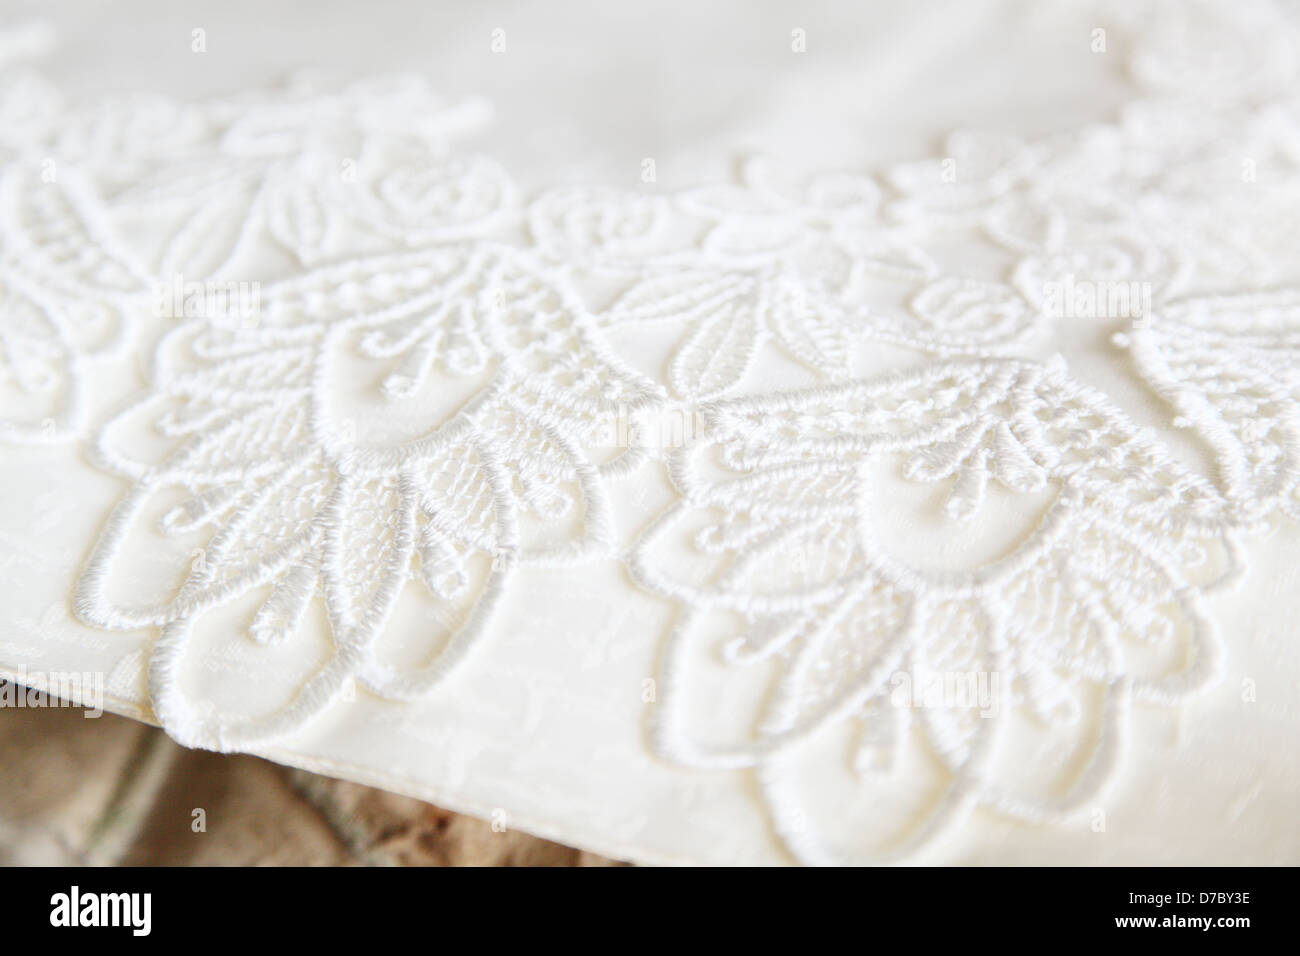 Embroidered lace doily Stock Photo